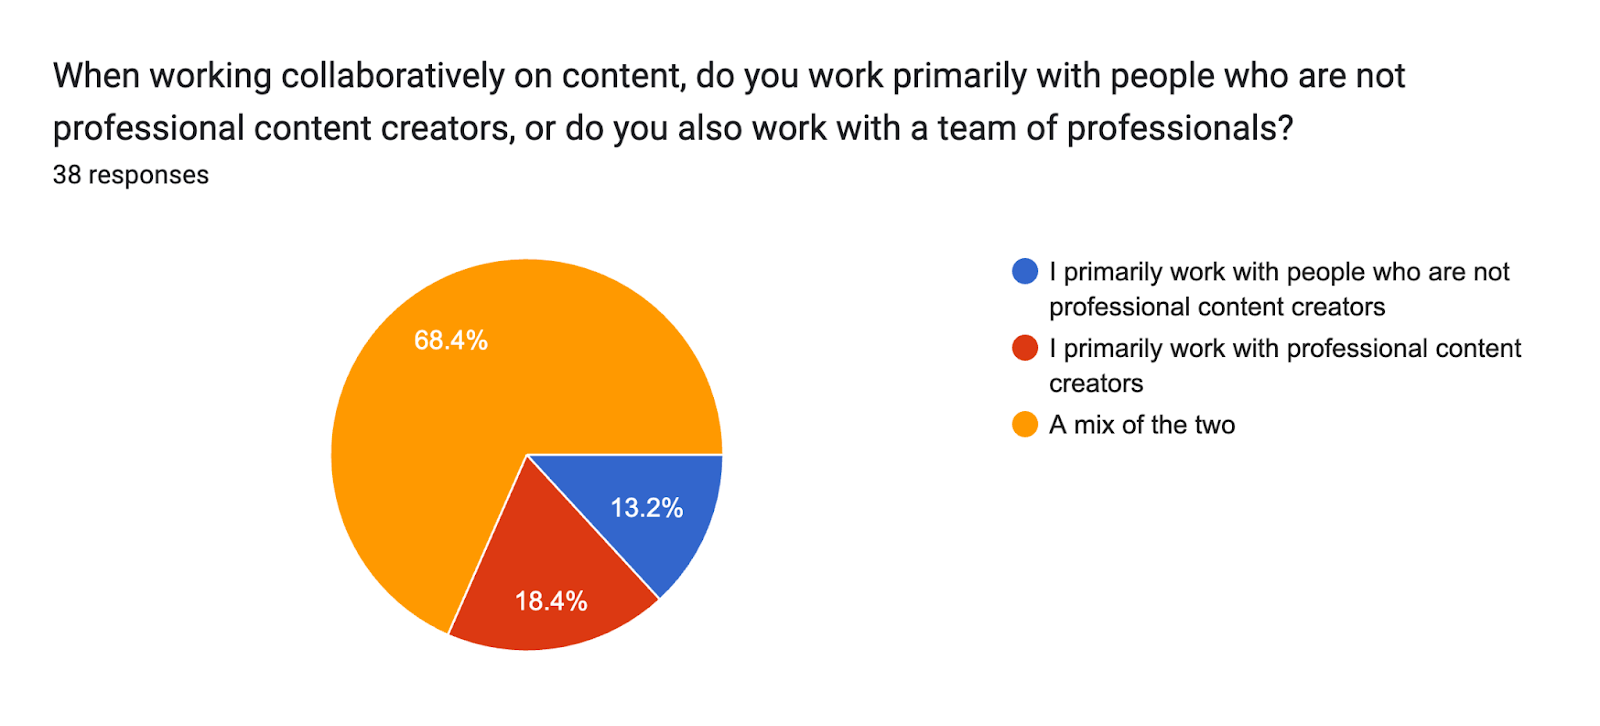 Pie chart. Question title: When working collaboratively on content, do you work primarily with people who are not professional content creators, or do you also work with a team of professionals? . Number of responses: 38 responses.